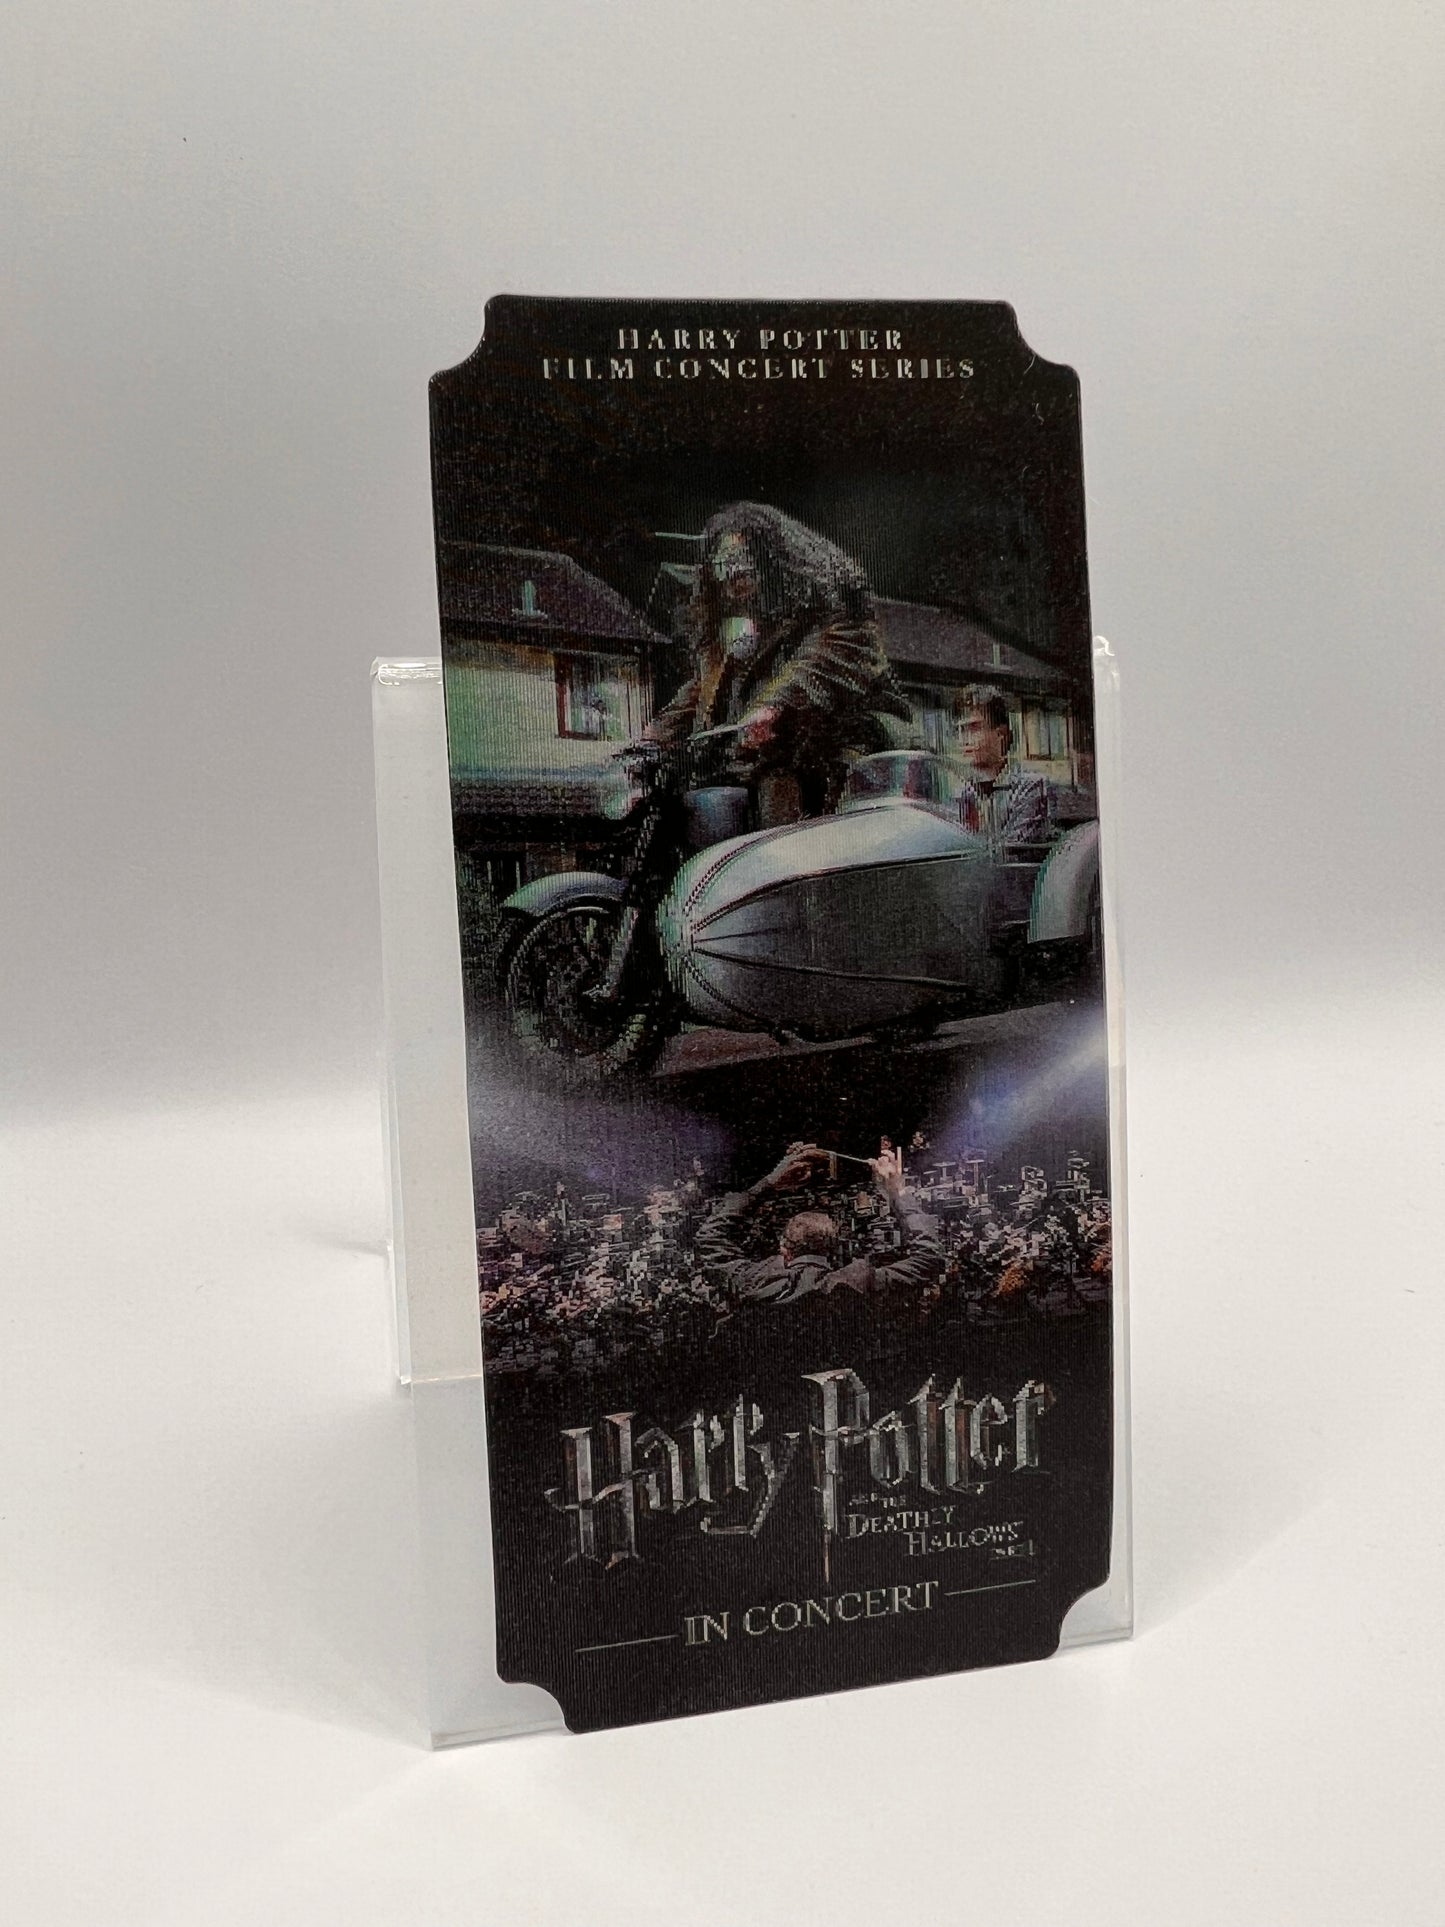 Harry Potter and the Deathly Hallows™ Part 1 in Concert Souvenir Ticket